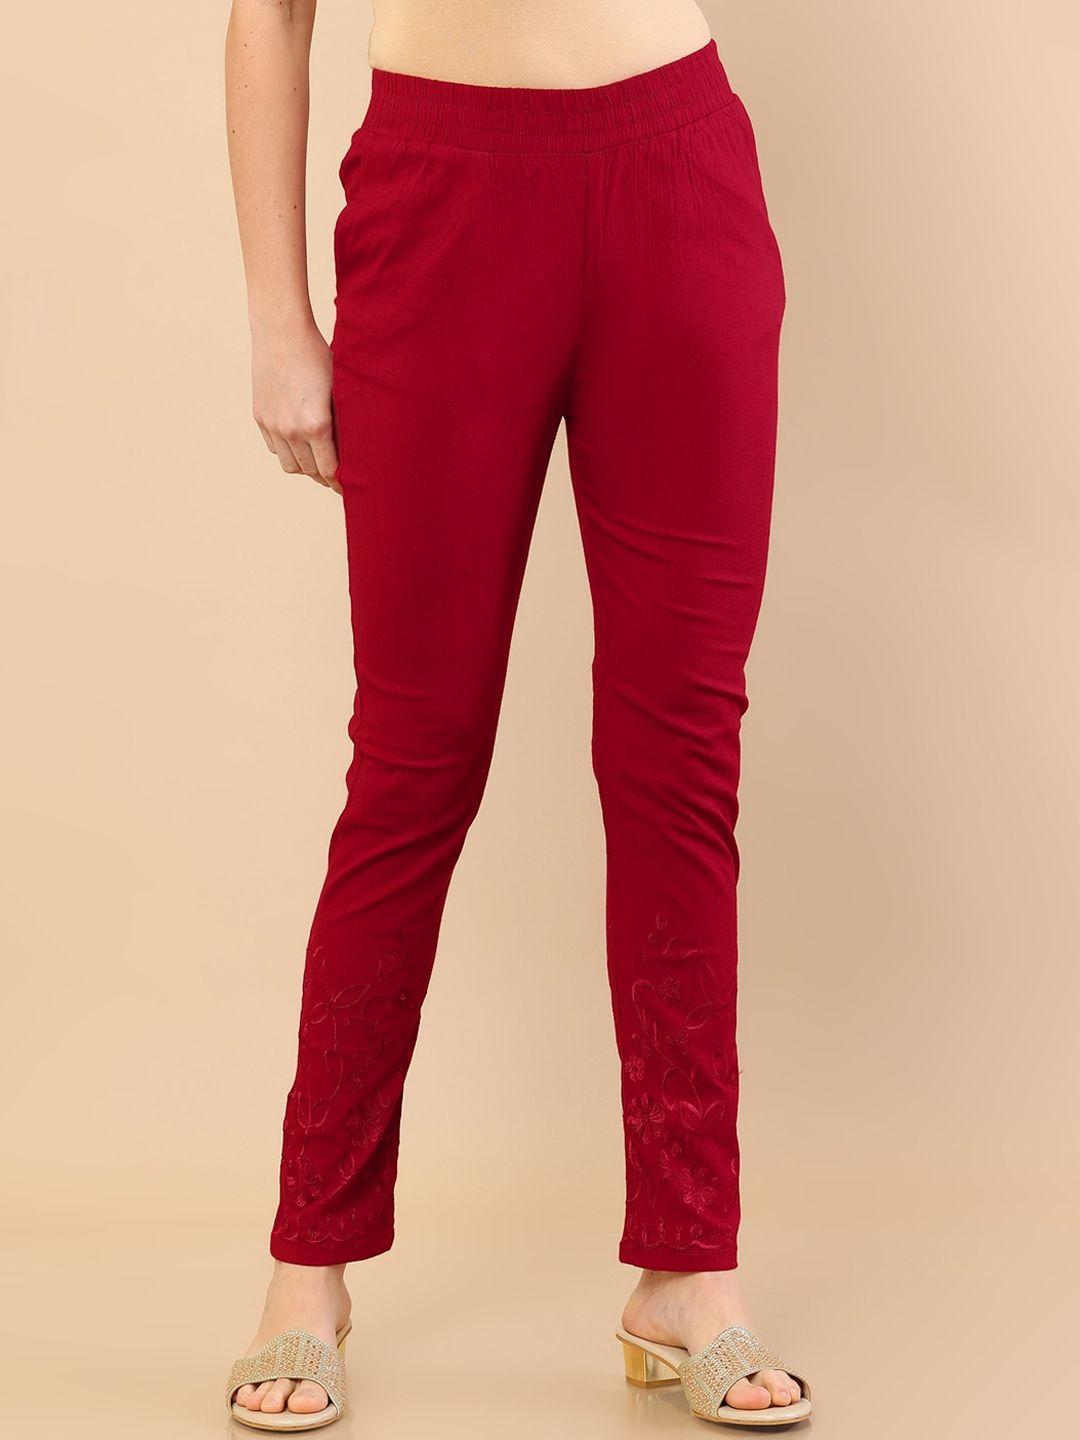 soch women red high-rise trousers with floral embroidery